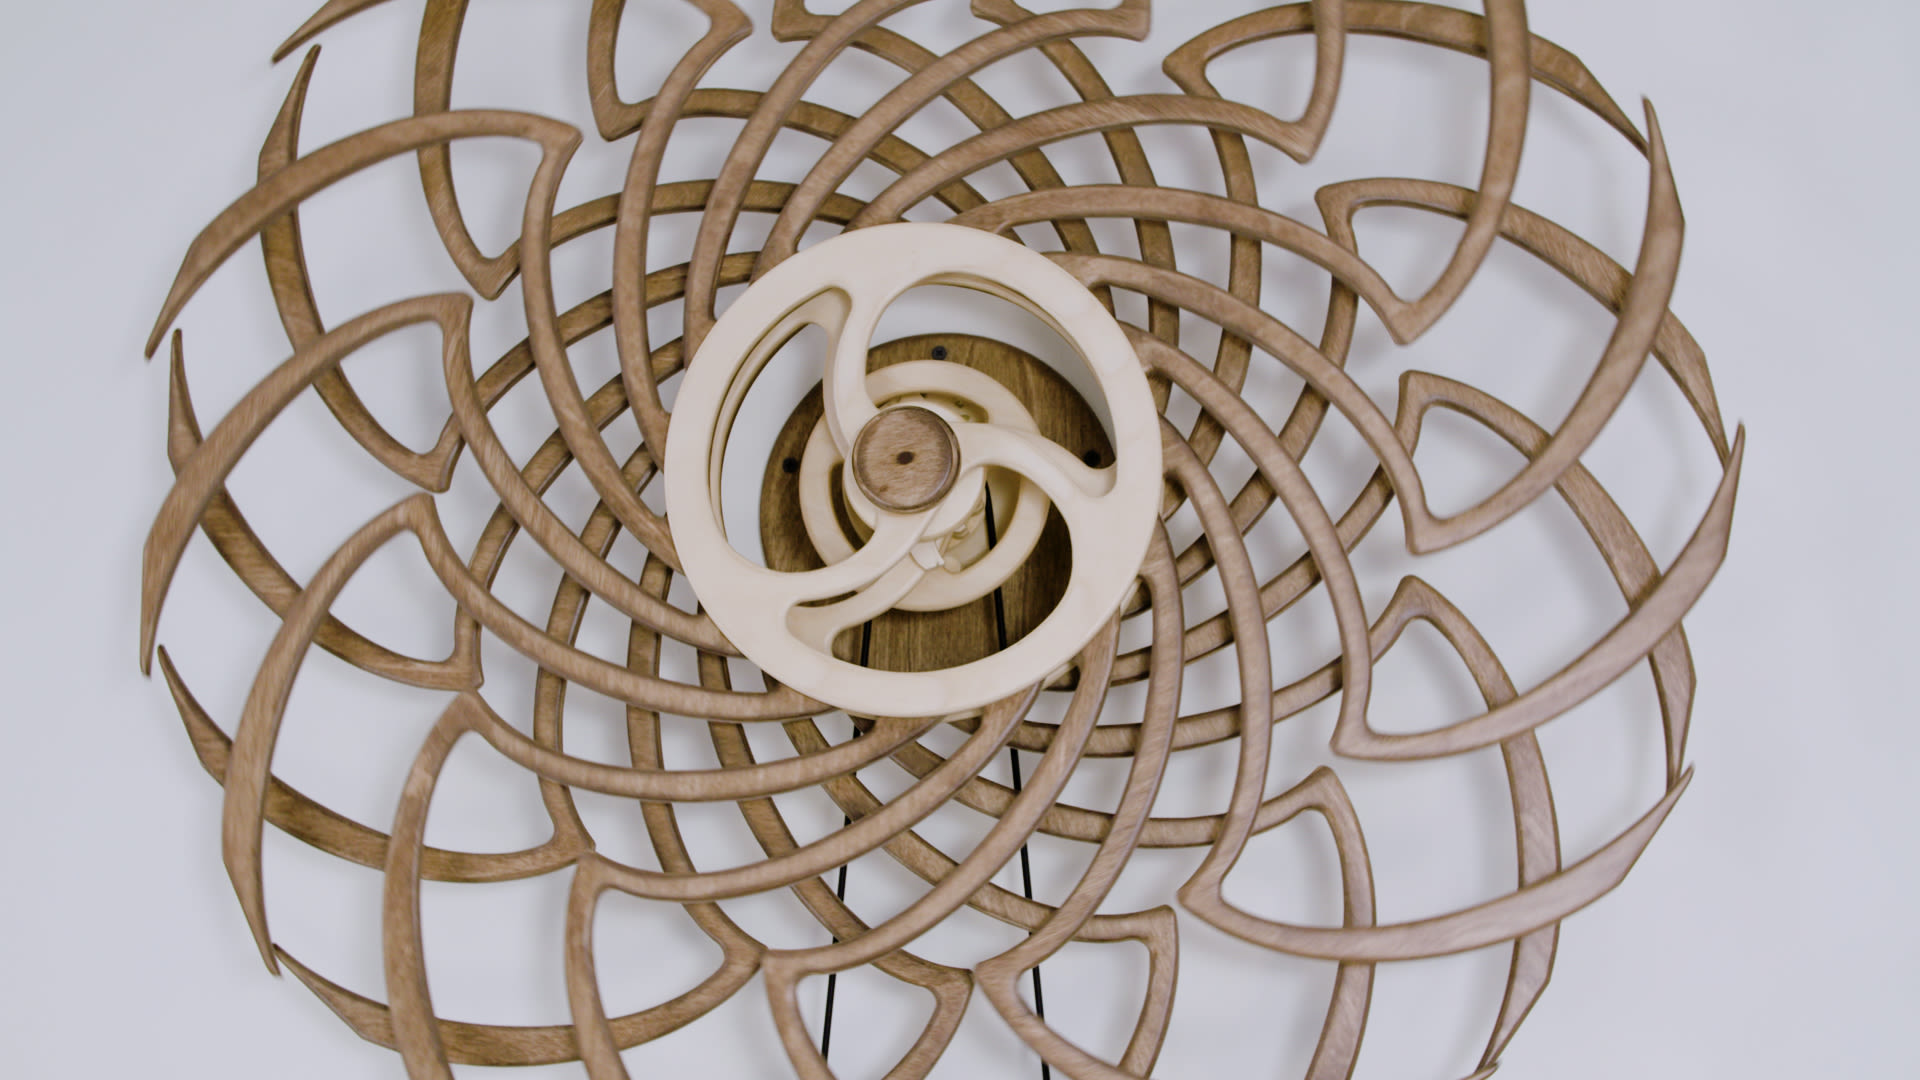 Kinetic Art - An Overview of this Moving Art Term